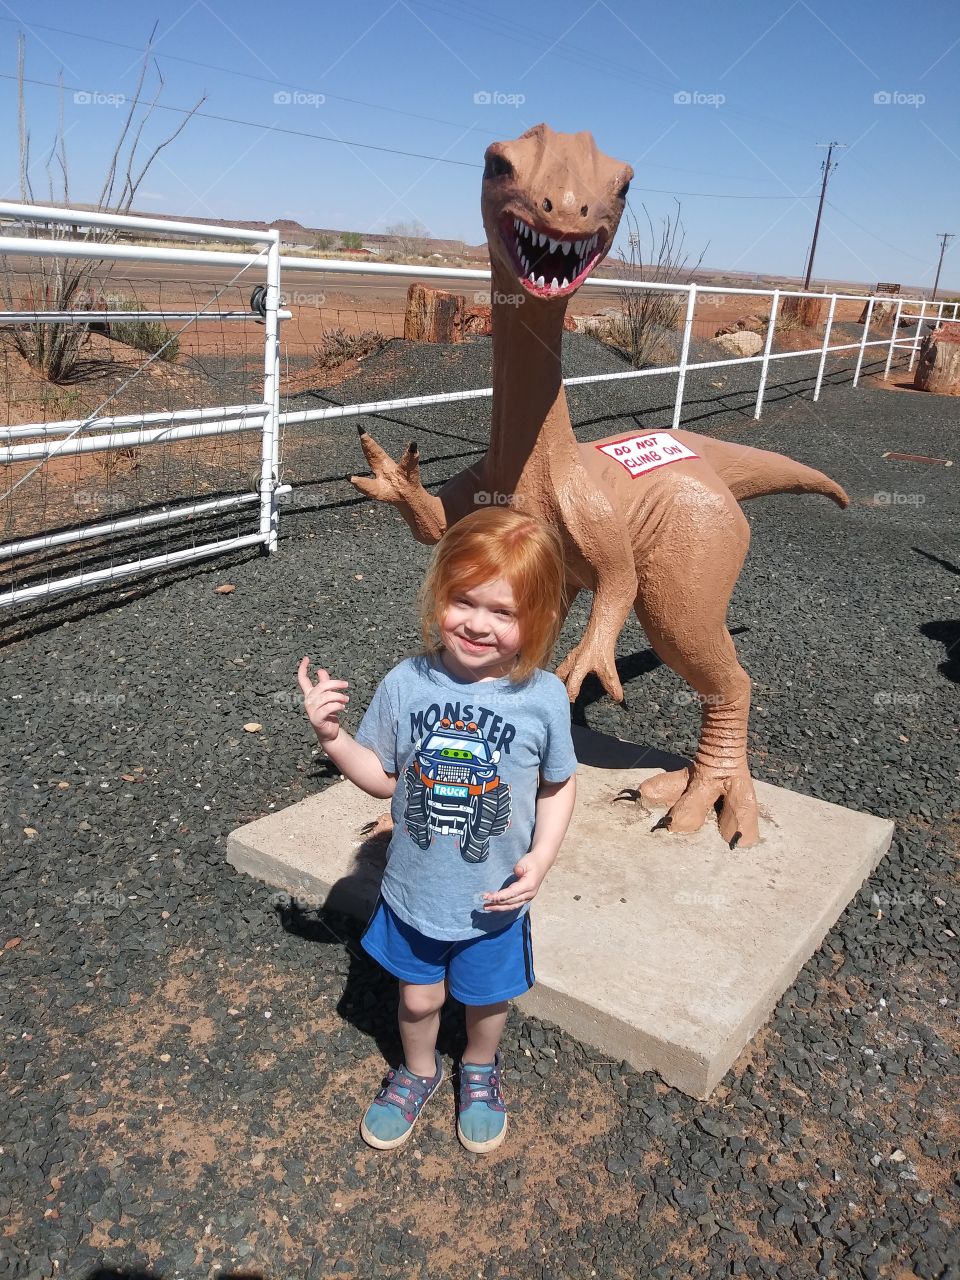 An excited little boy checking out the dinosaurs on a warm day